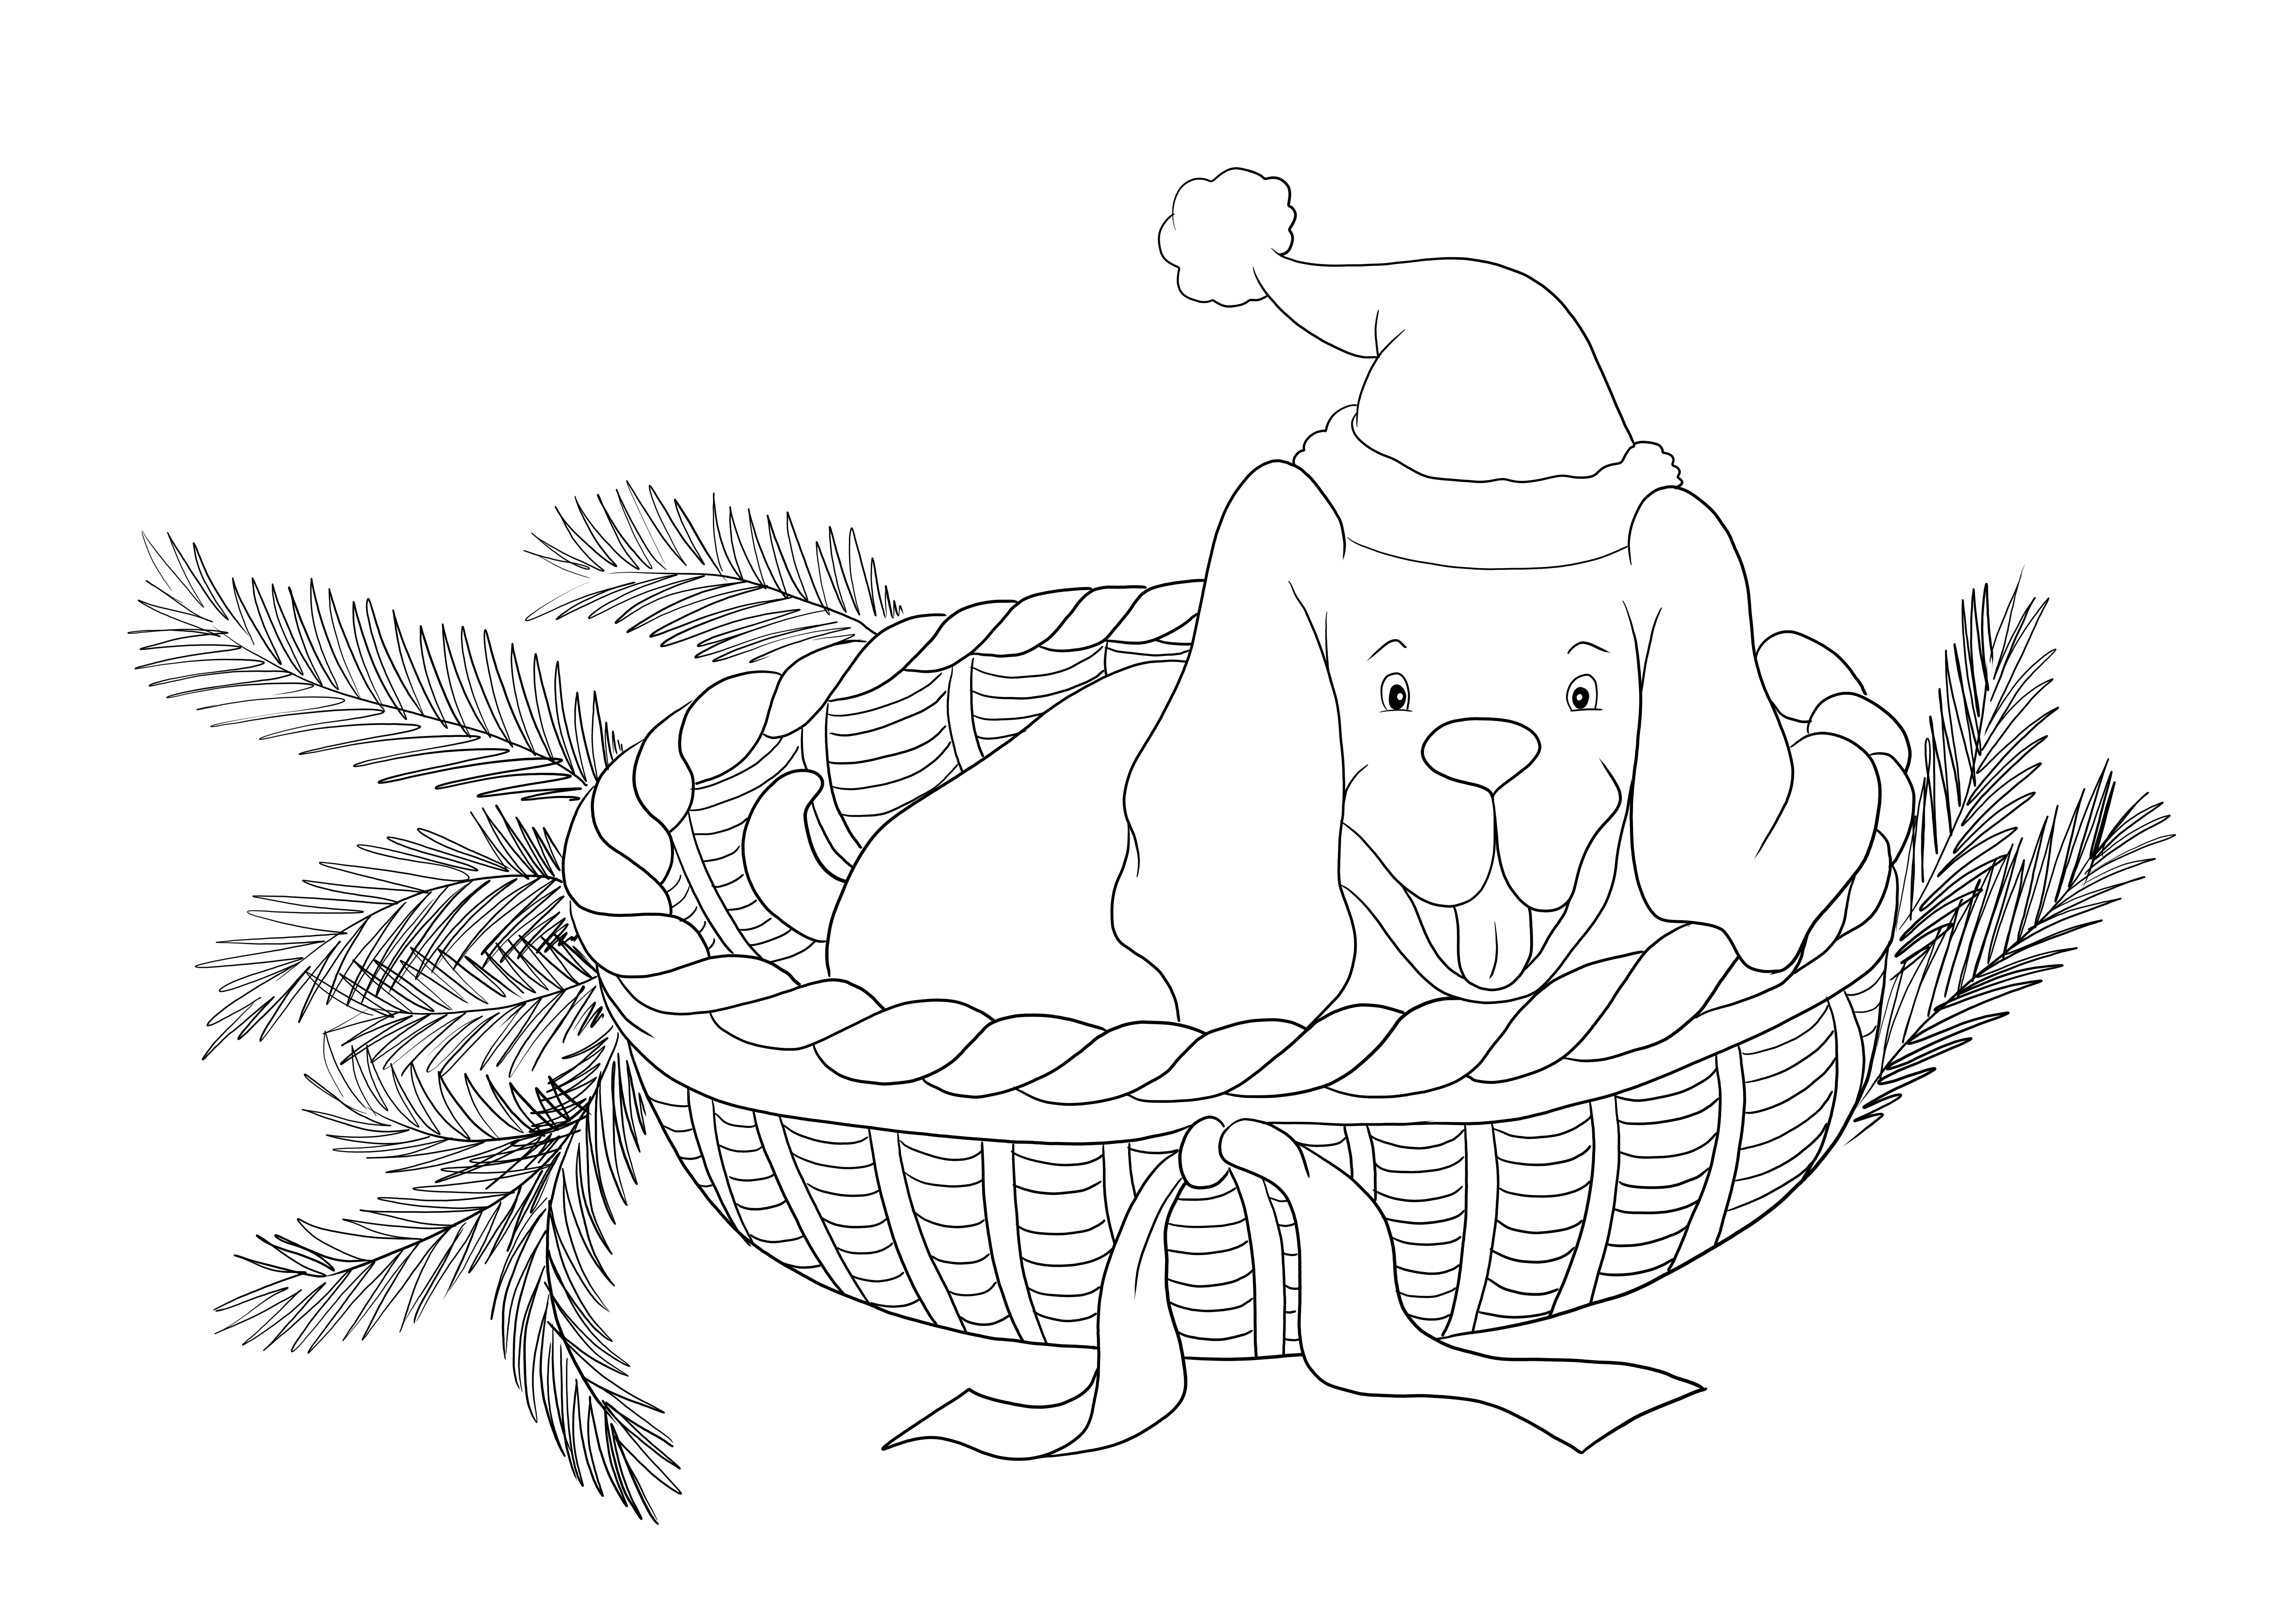 A wonderful Christmas dog free coloring image to brighten the holidays